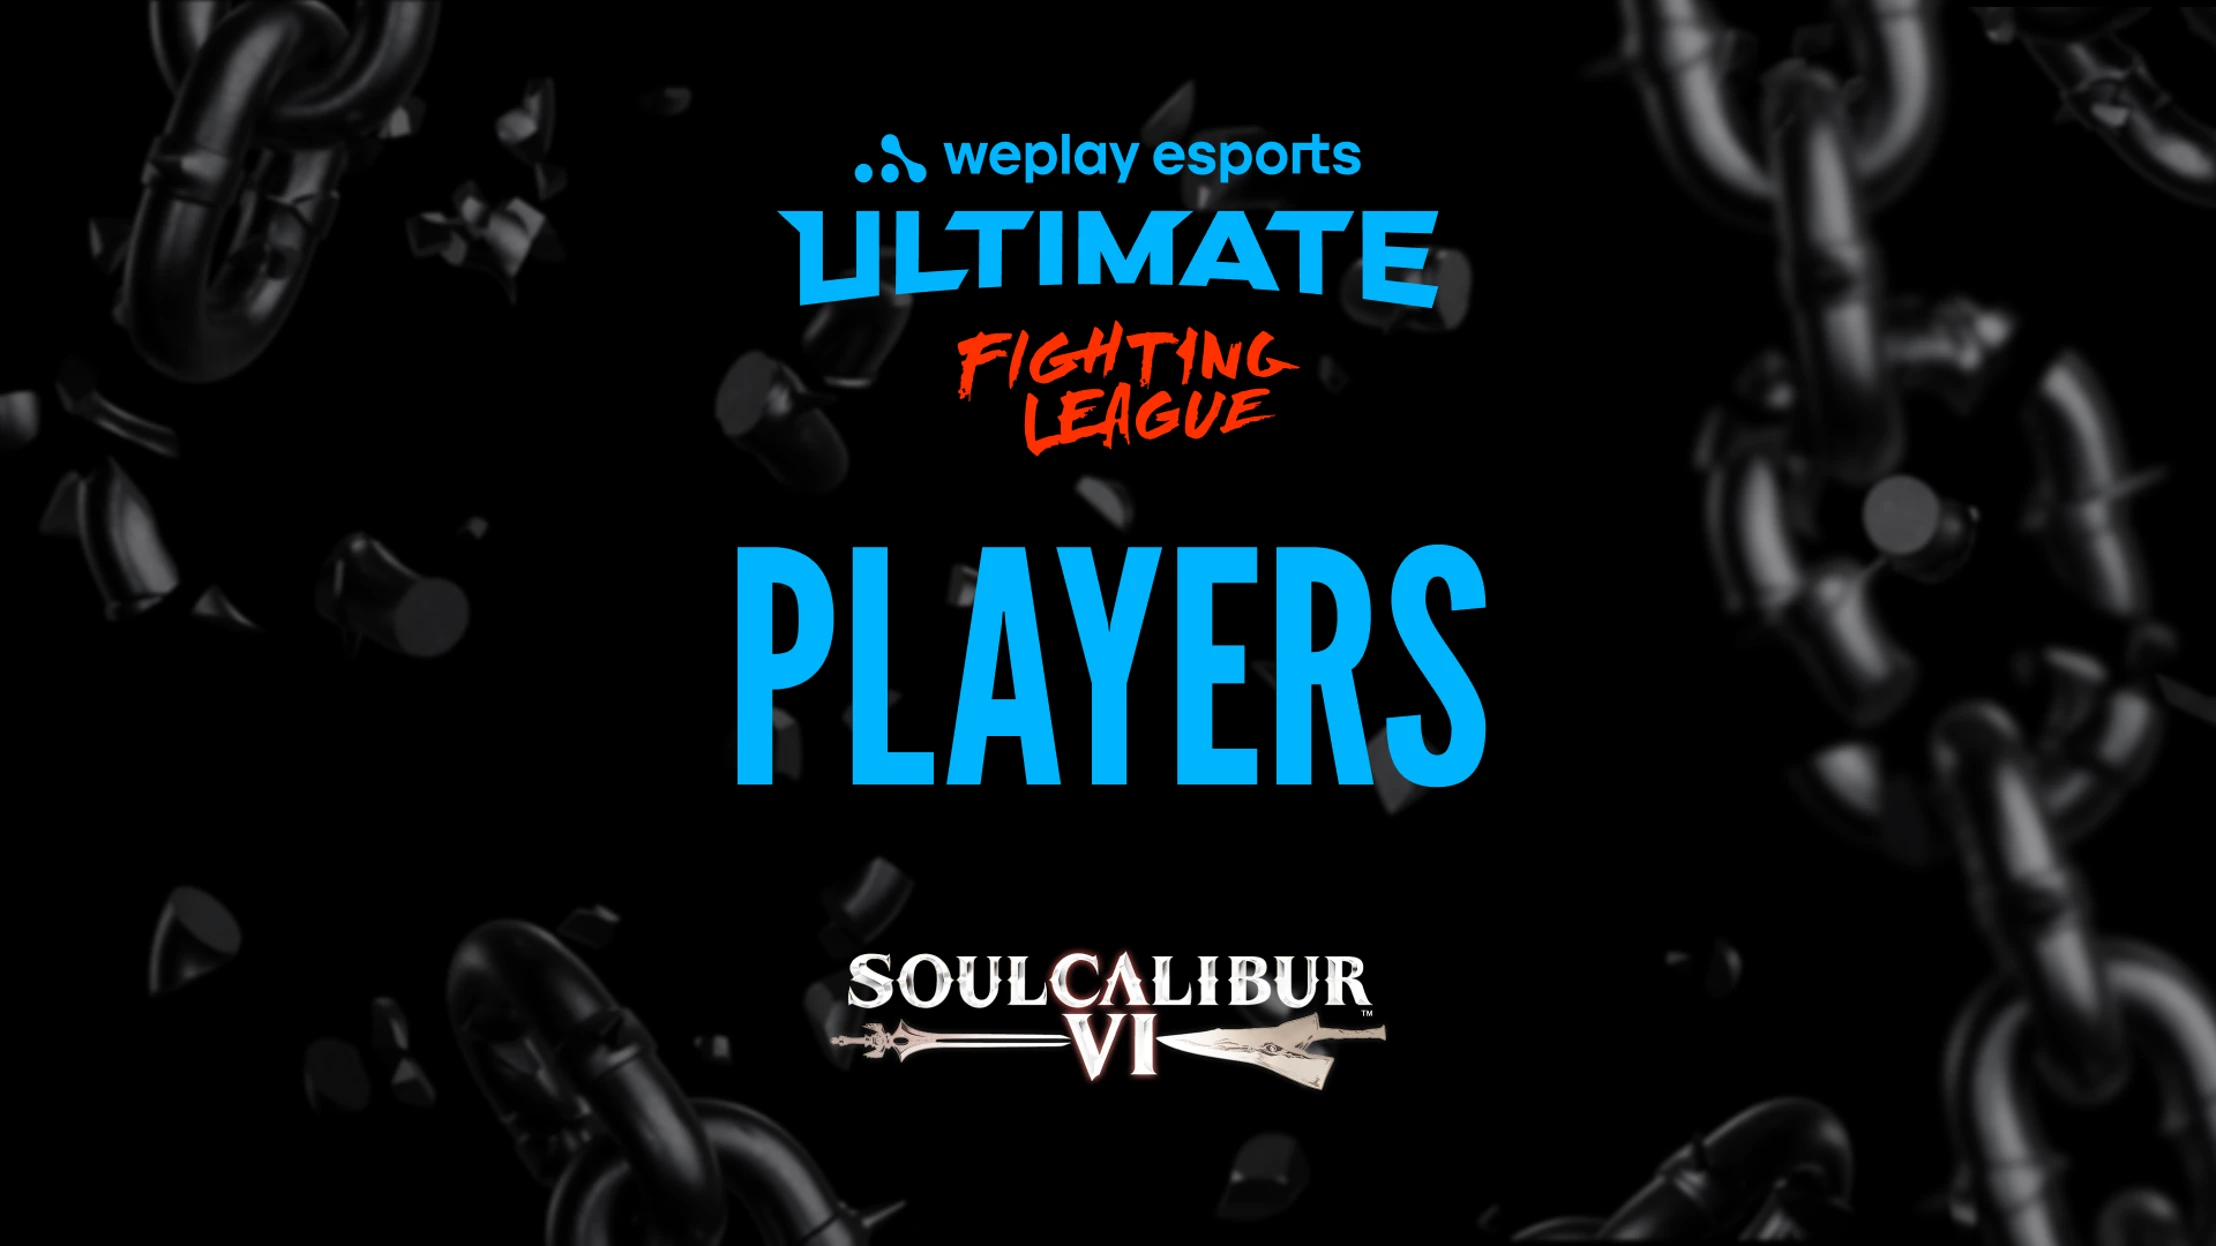 WePlay Esports reveals player roster of WePlay Ultimate Fighting League Season 1 for SOULCALIBUR VI